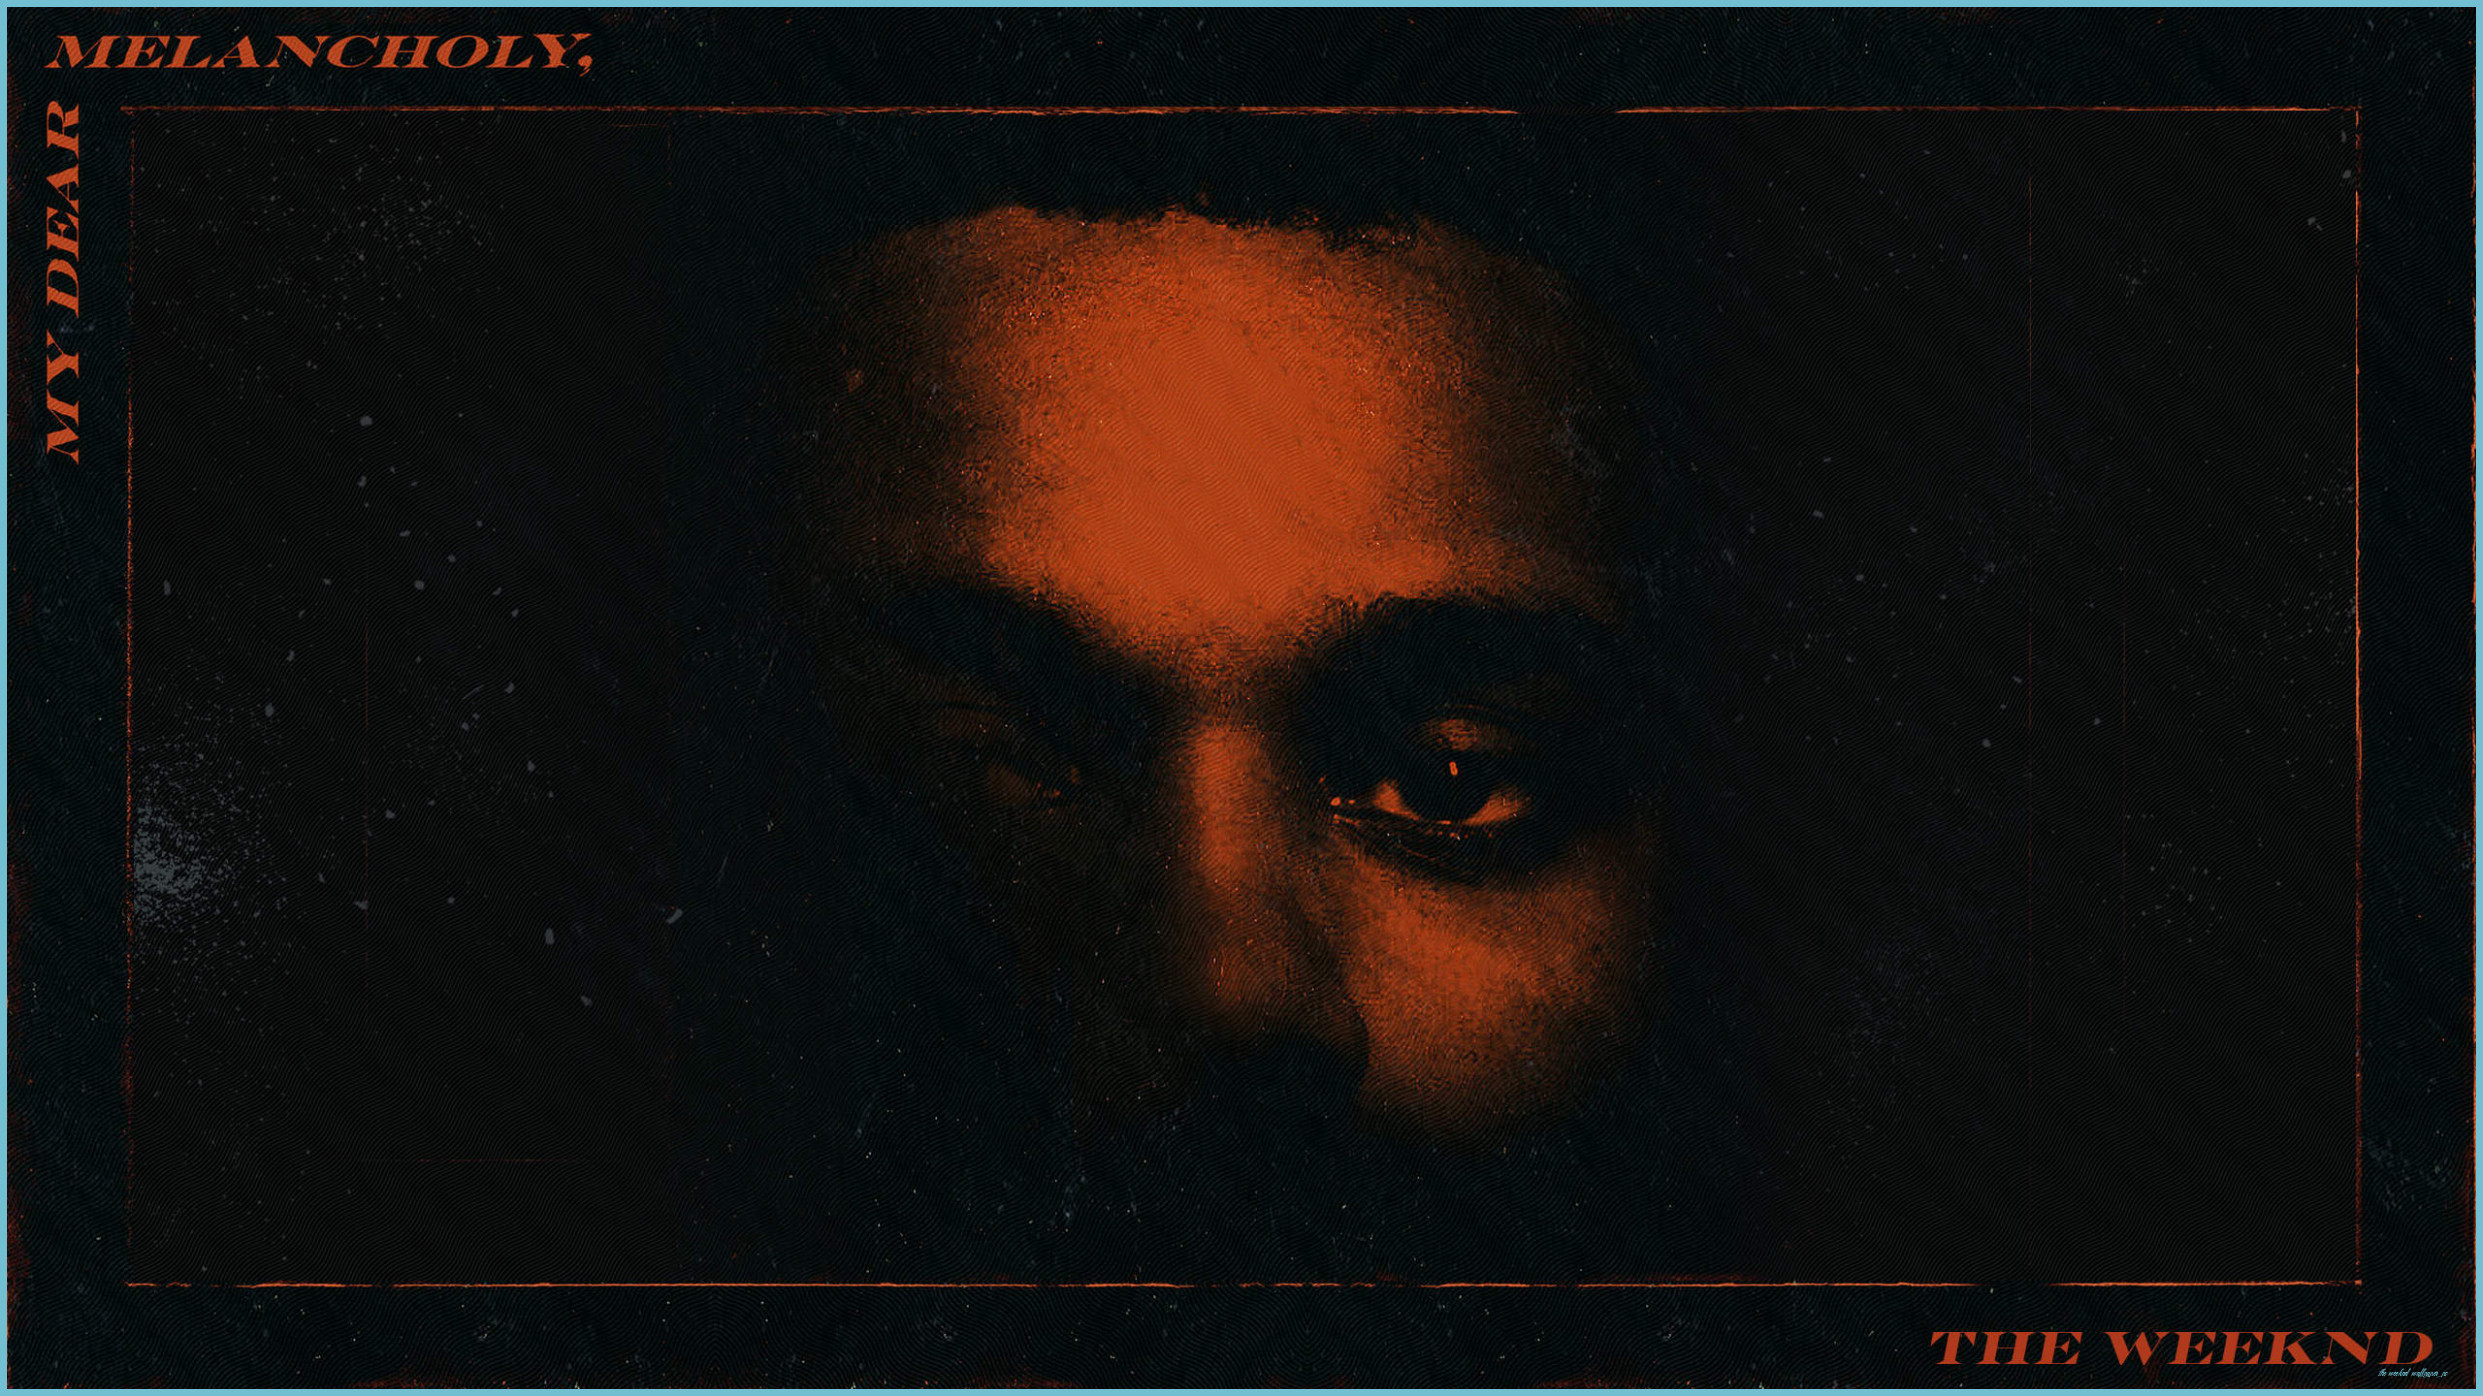 The Weeknd Wallpaper (best The Weeknd Wallpaper and image) on WallpaperChat